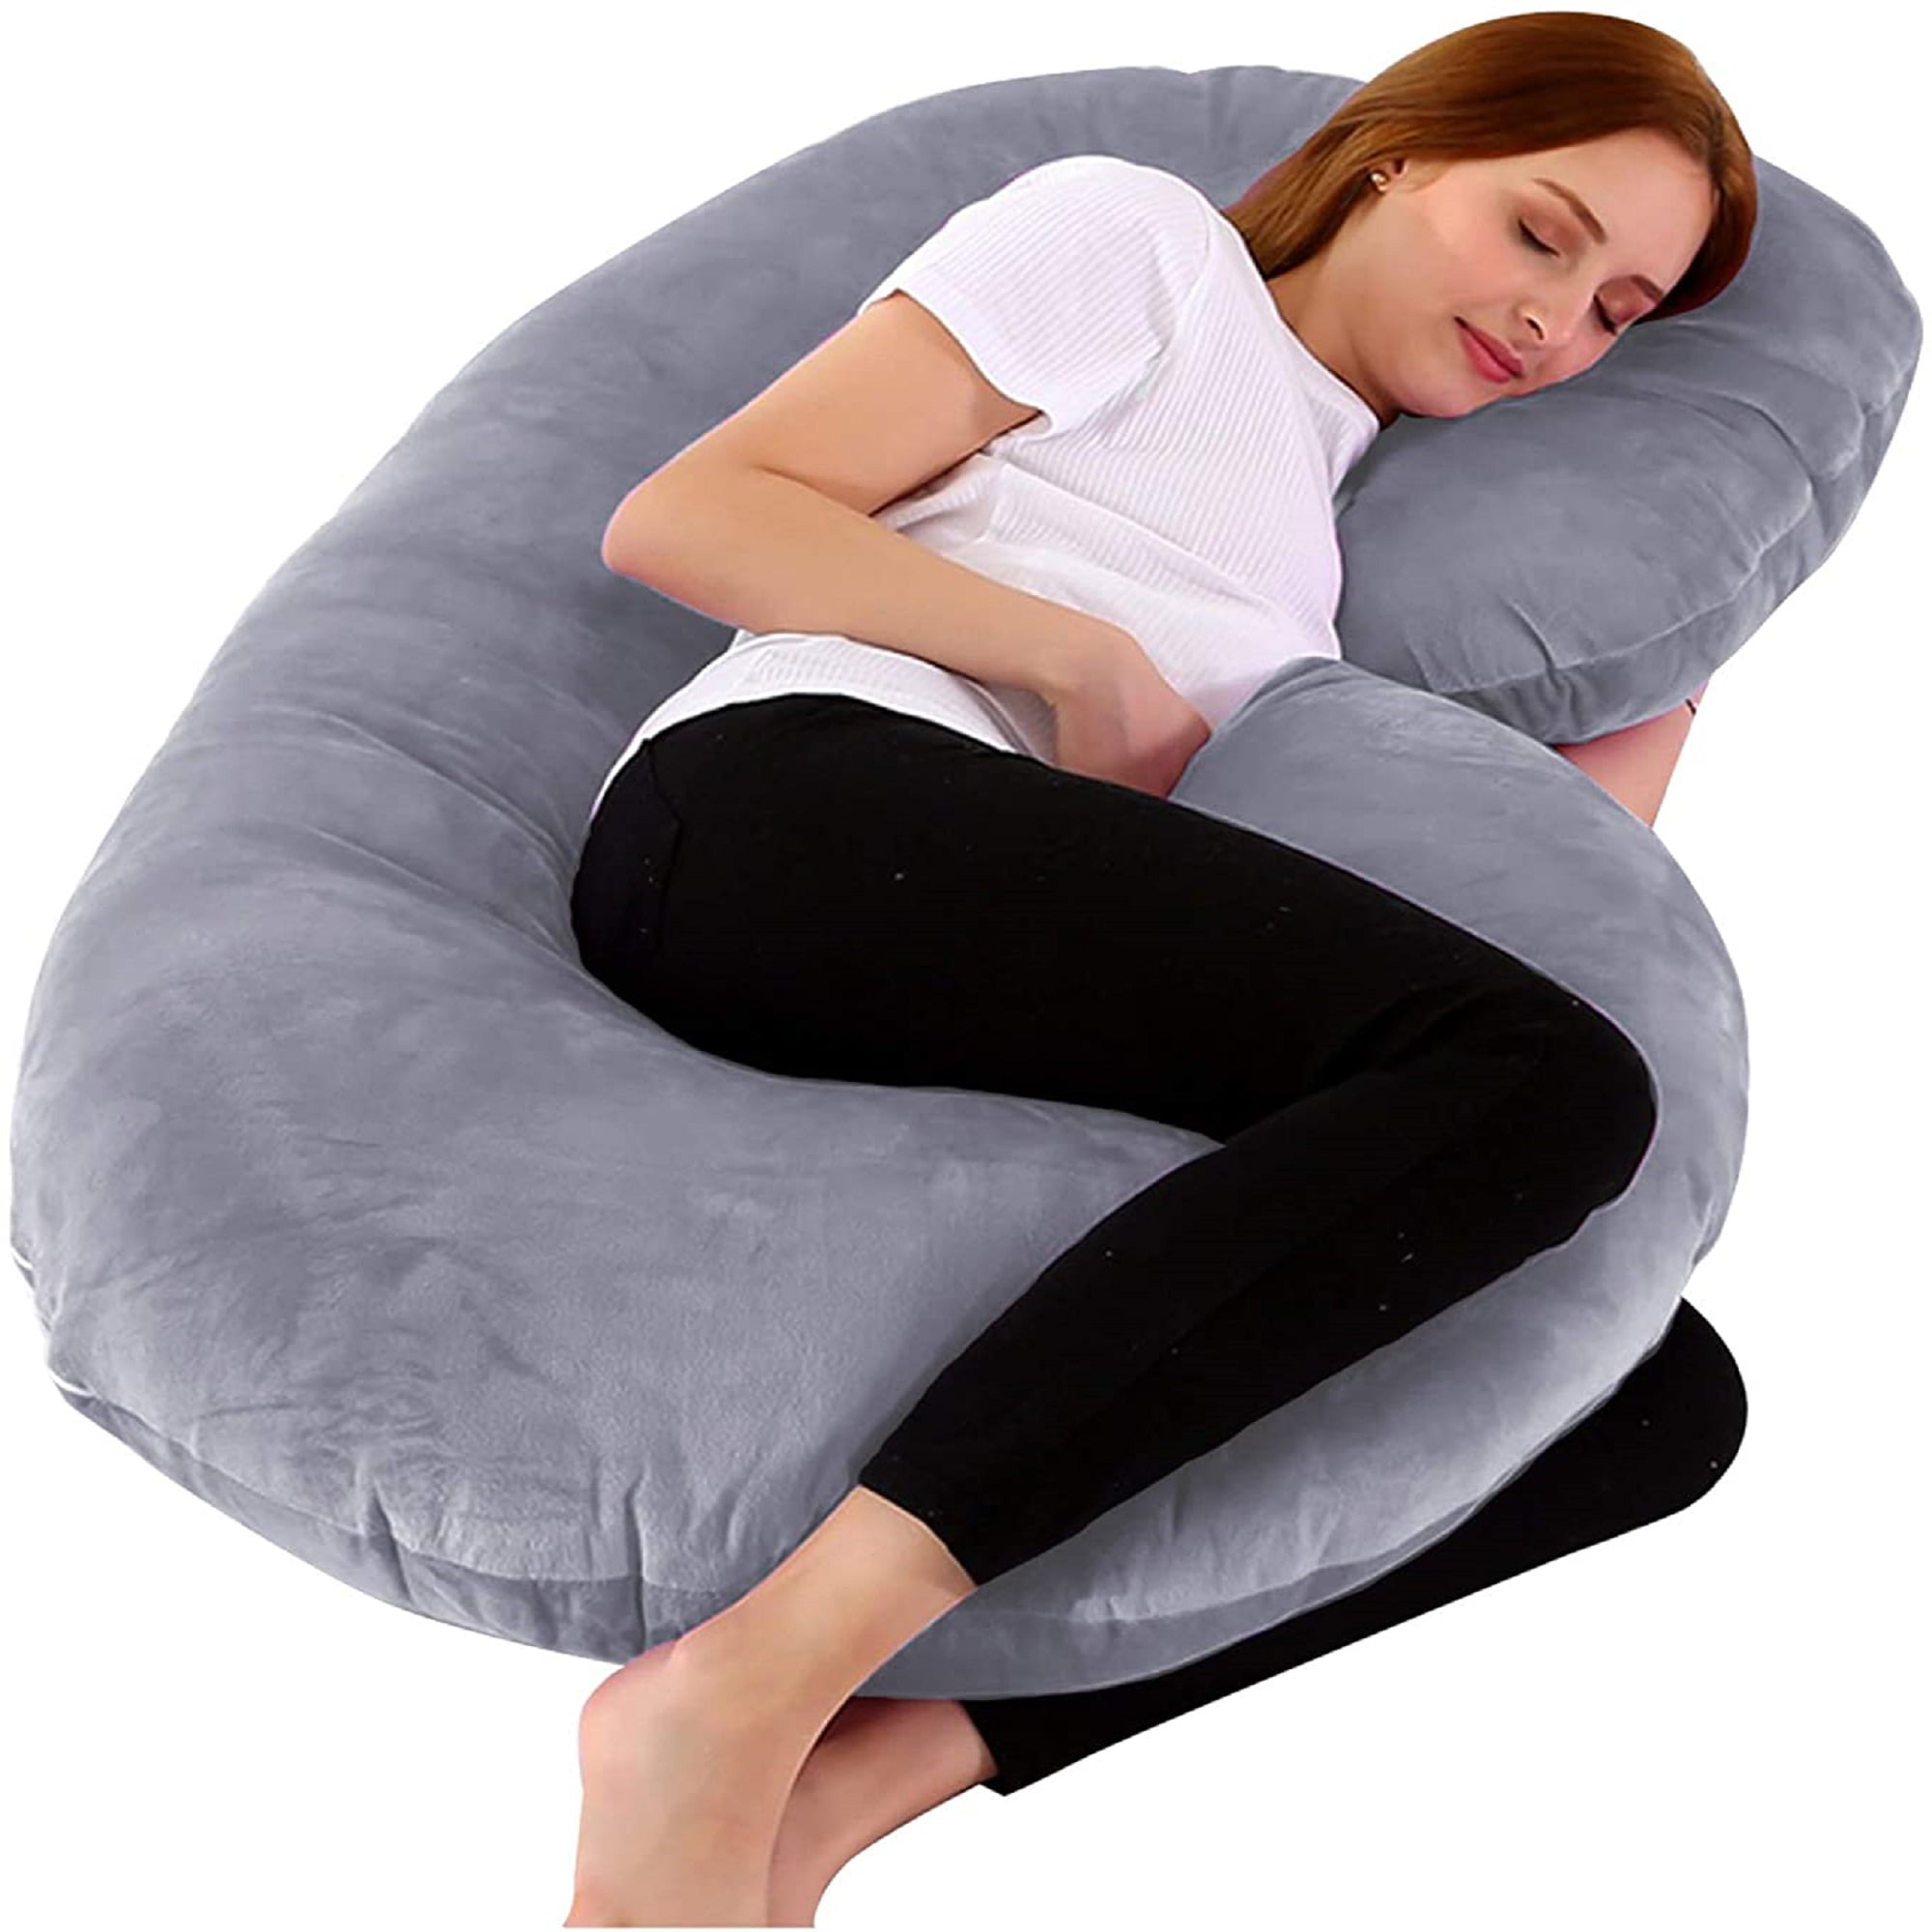 Full Body Pregnancy Pillow C-Shaped Maternity Cushion Support Pregnant 